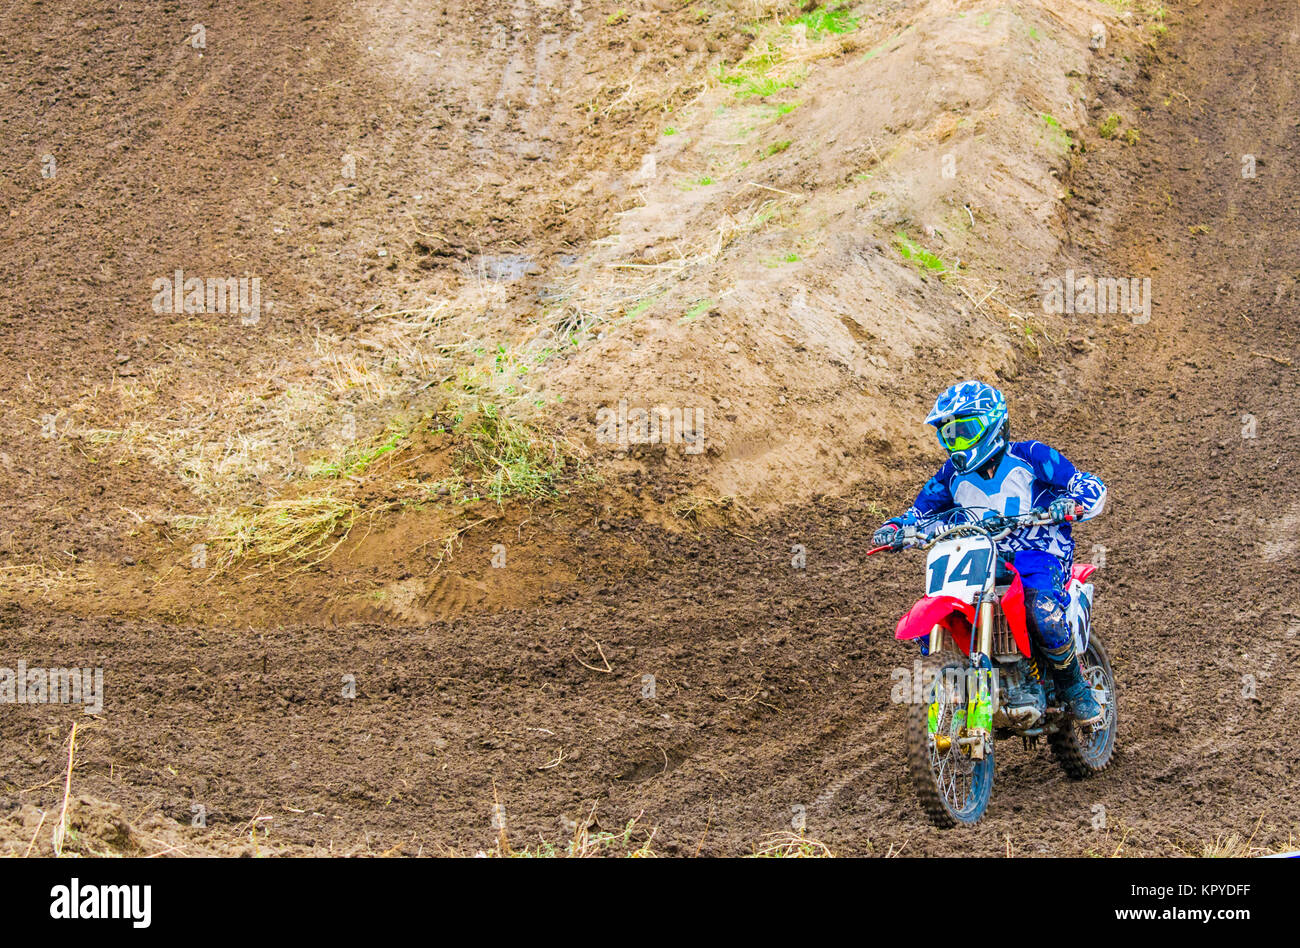 Extreme sport. A rider on a motorcycle rides the sand. Racer on motocicle in blue clothes Stock Photo